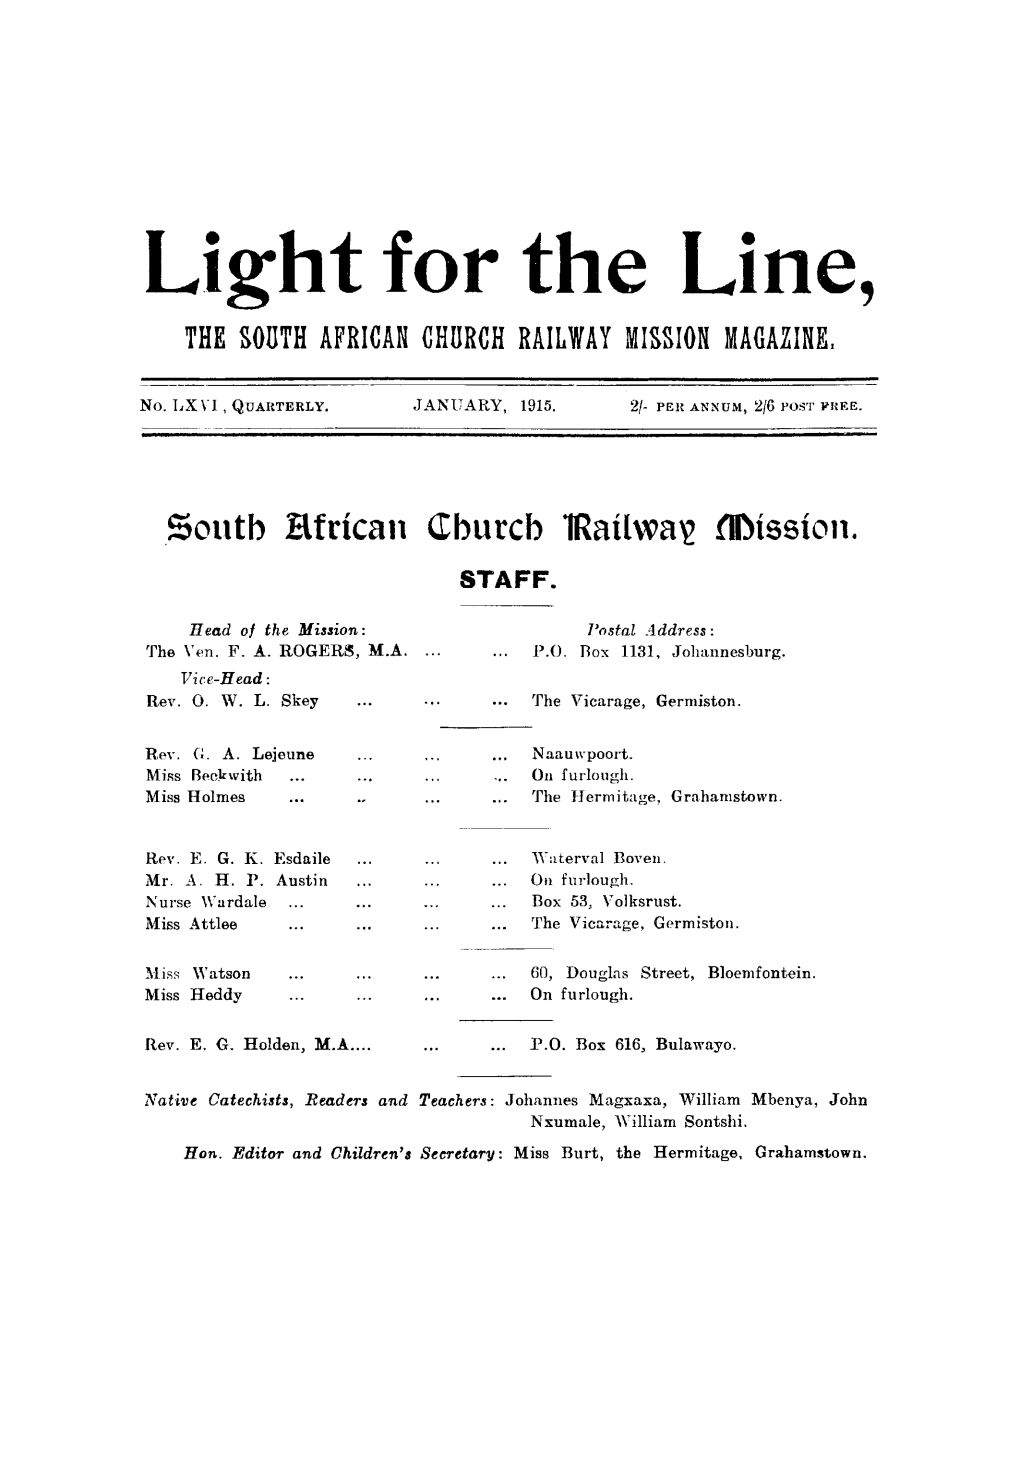 Light for the Line, the SOUTH AFRICAN CHURCH RAILWAY MISSION MAGAZINE